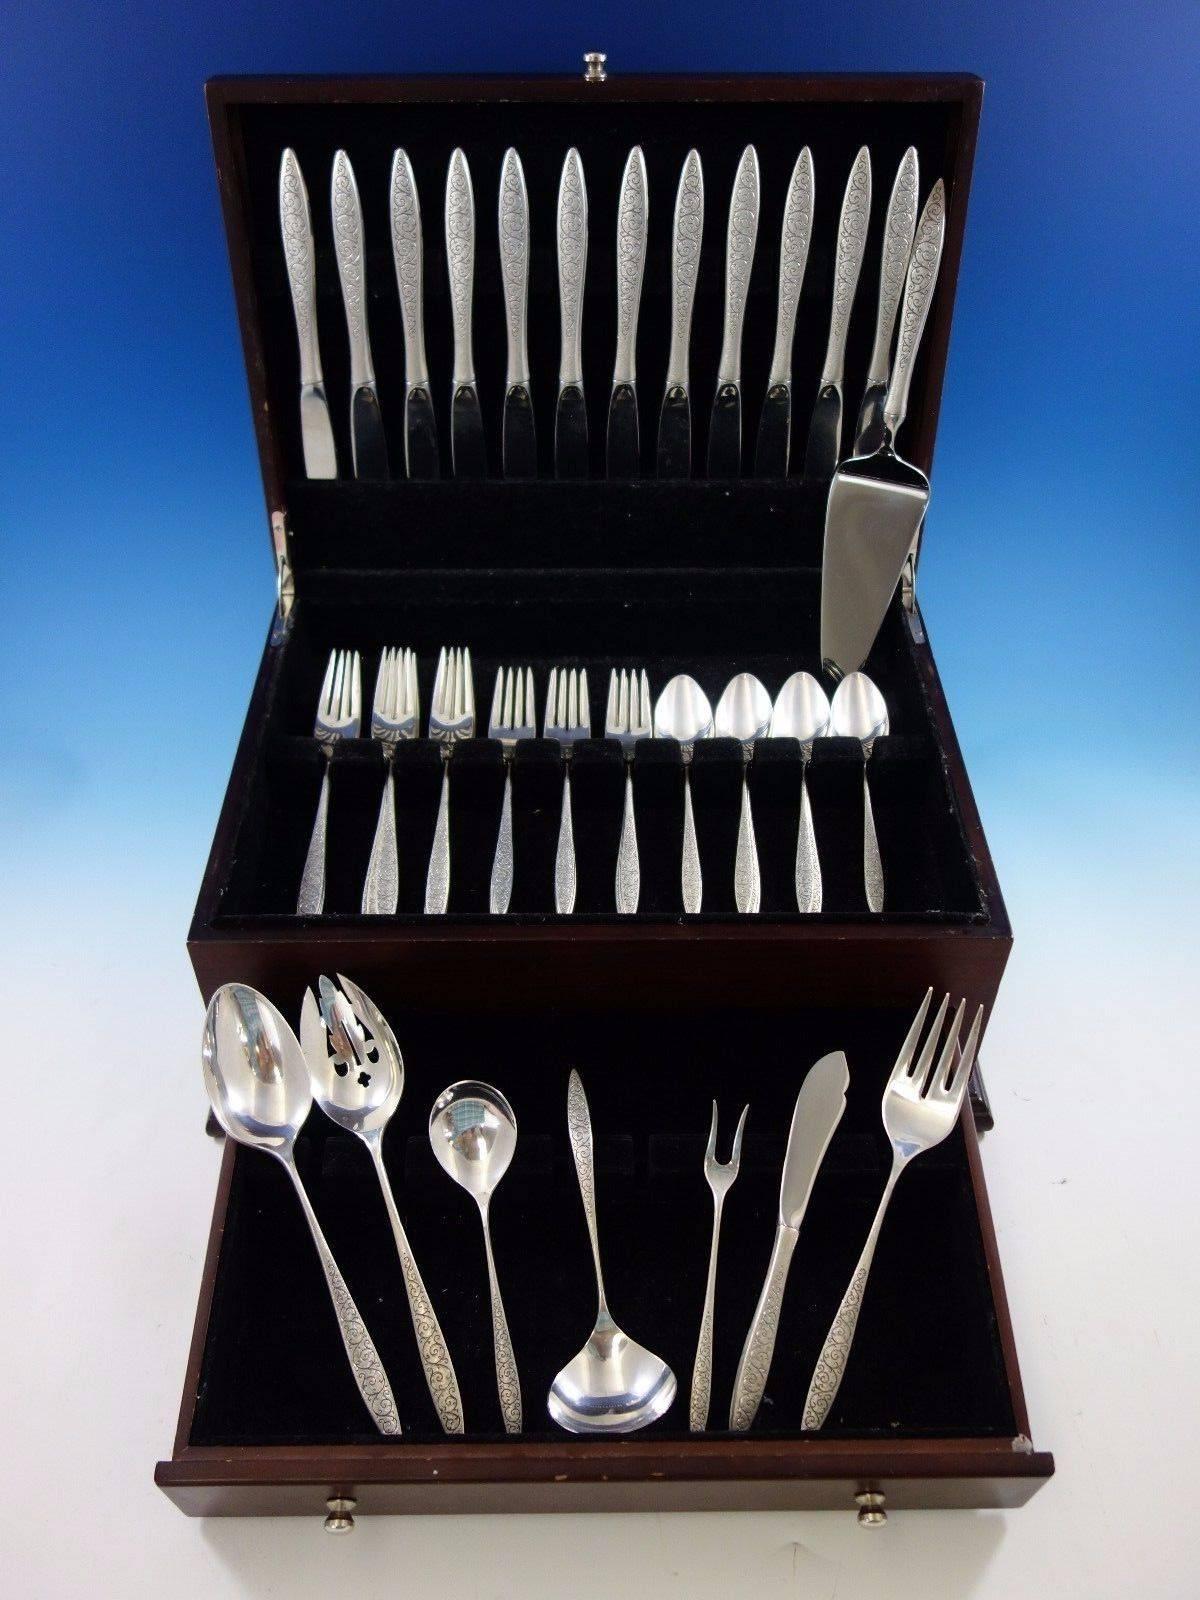 Spanish Lace by Wallace Besteck aus Sterlingsilber - 56 Teile. Dieses Set enthält: 

12 Messer, 9 1/8